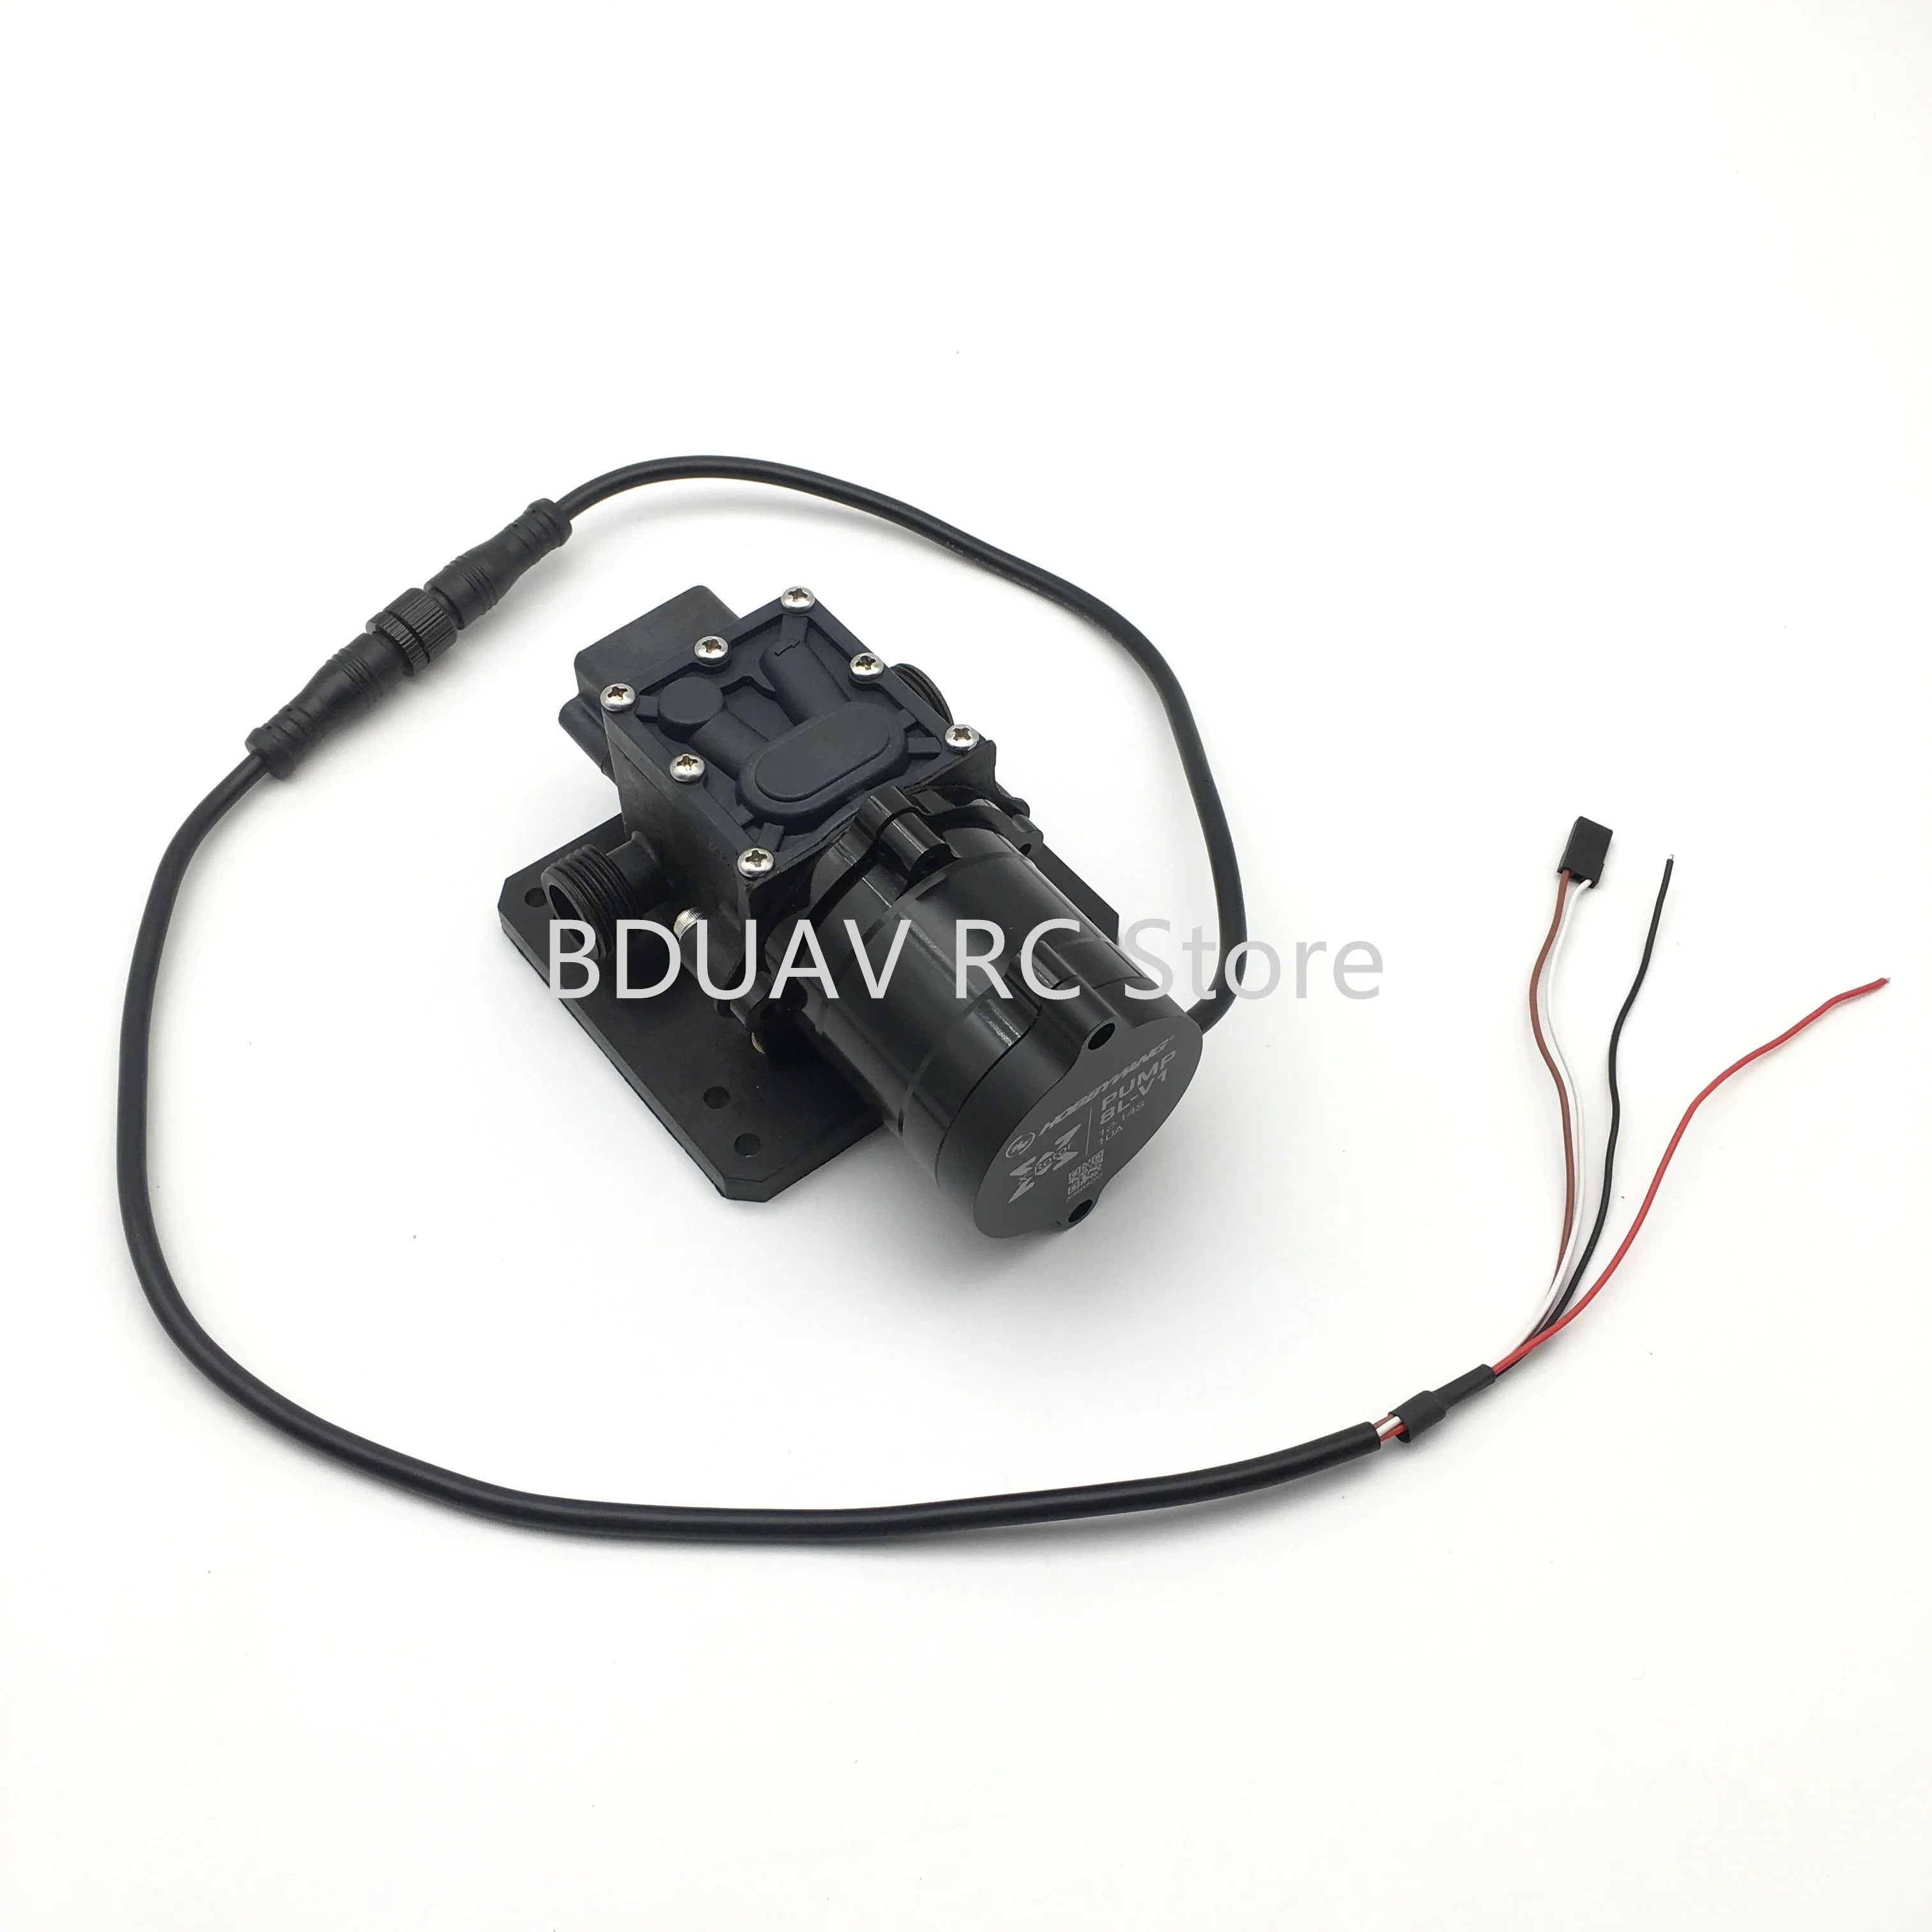 Hobbwying Drone Spray System, Hobbywing 5L Brushless Water Pump: operating voltage: 12-14S (DC44-6